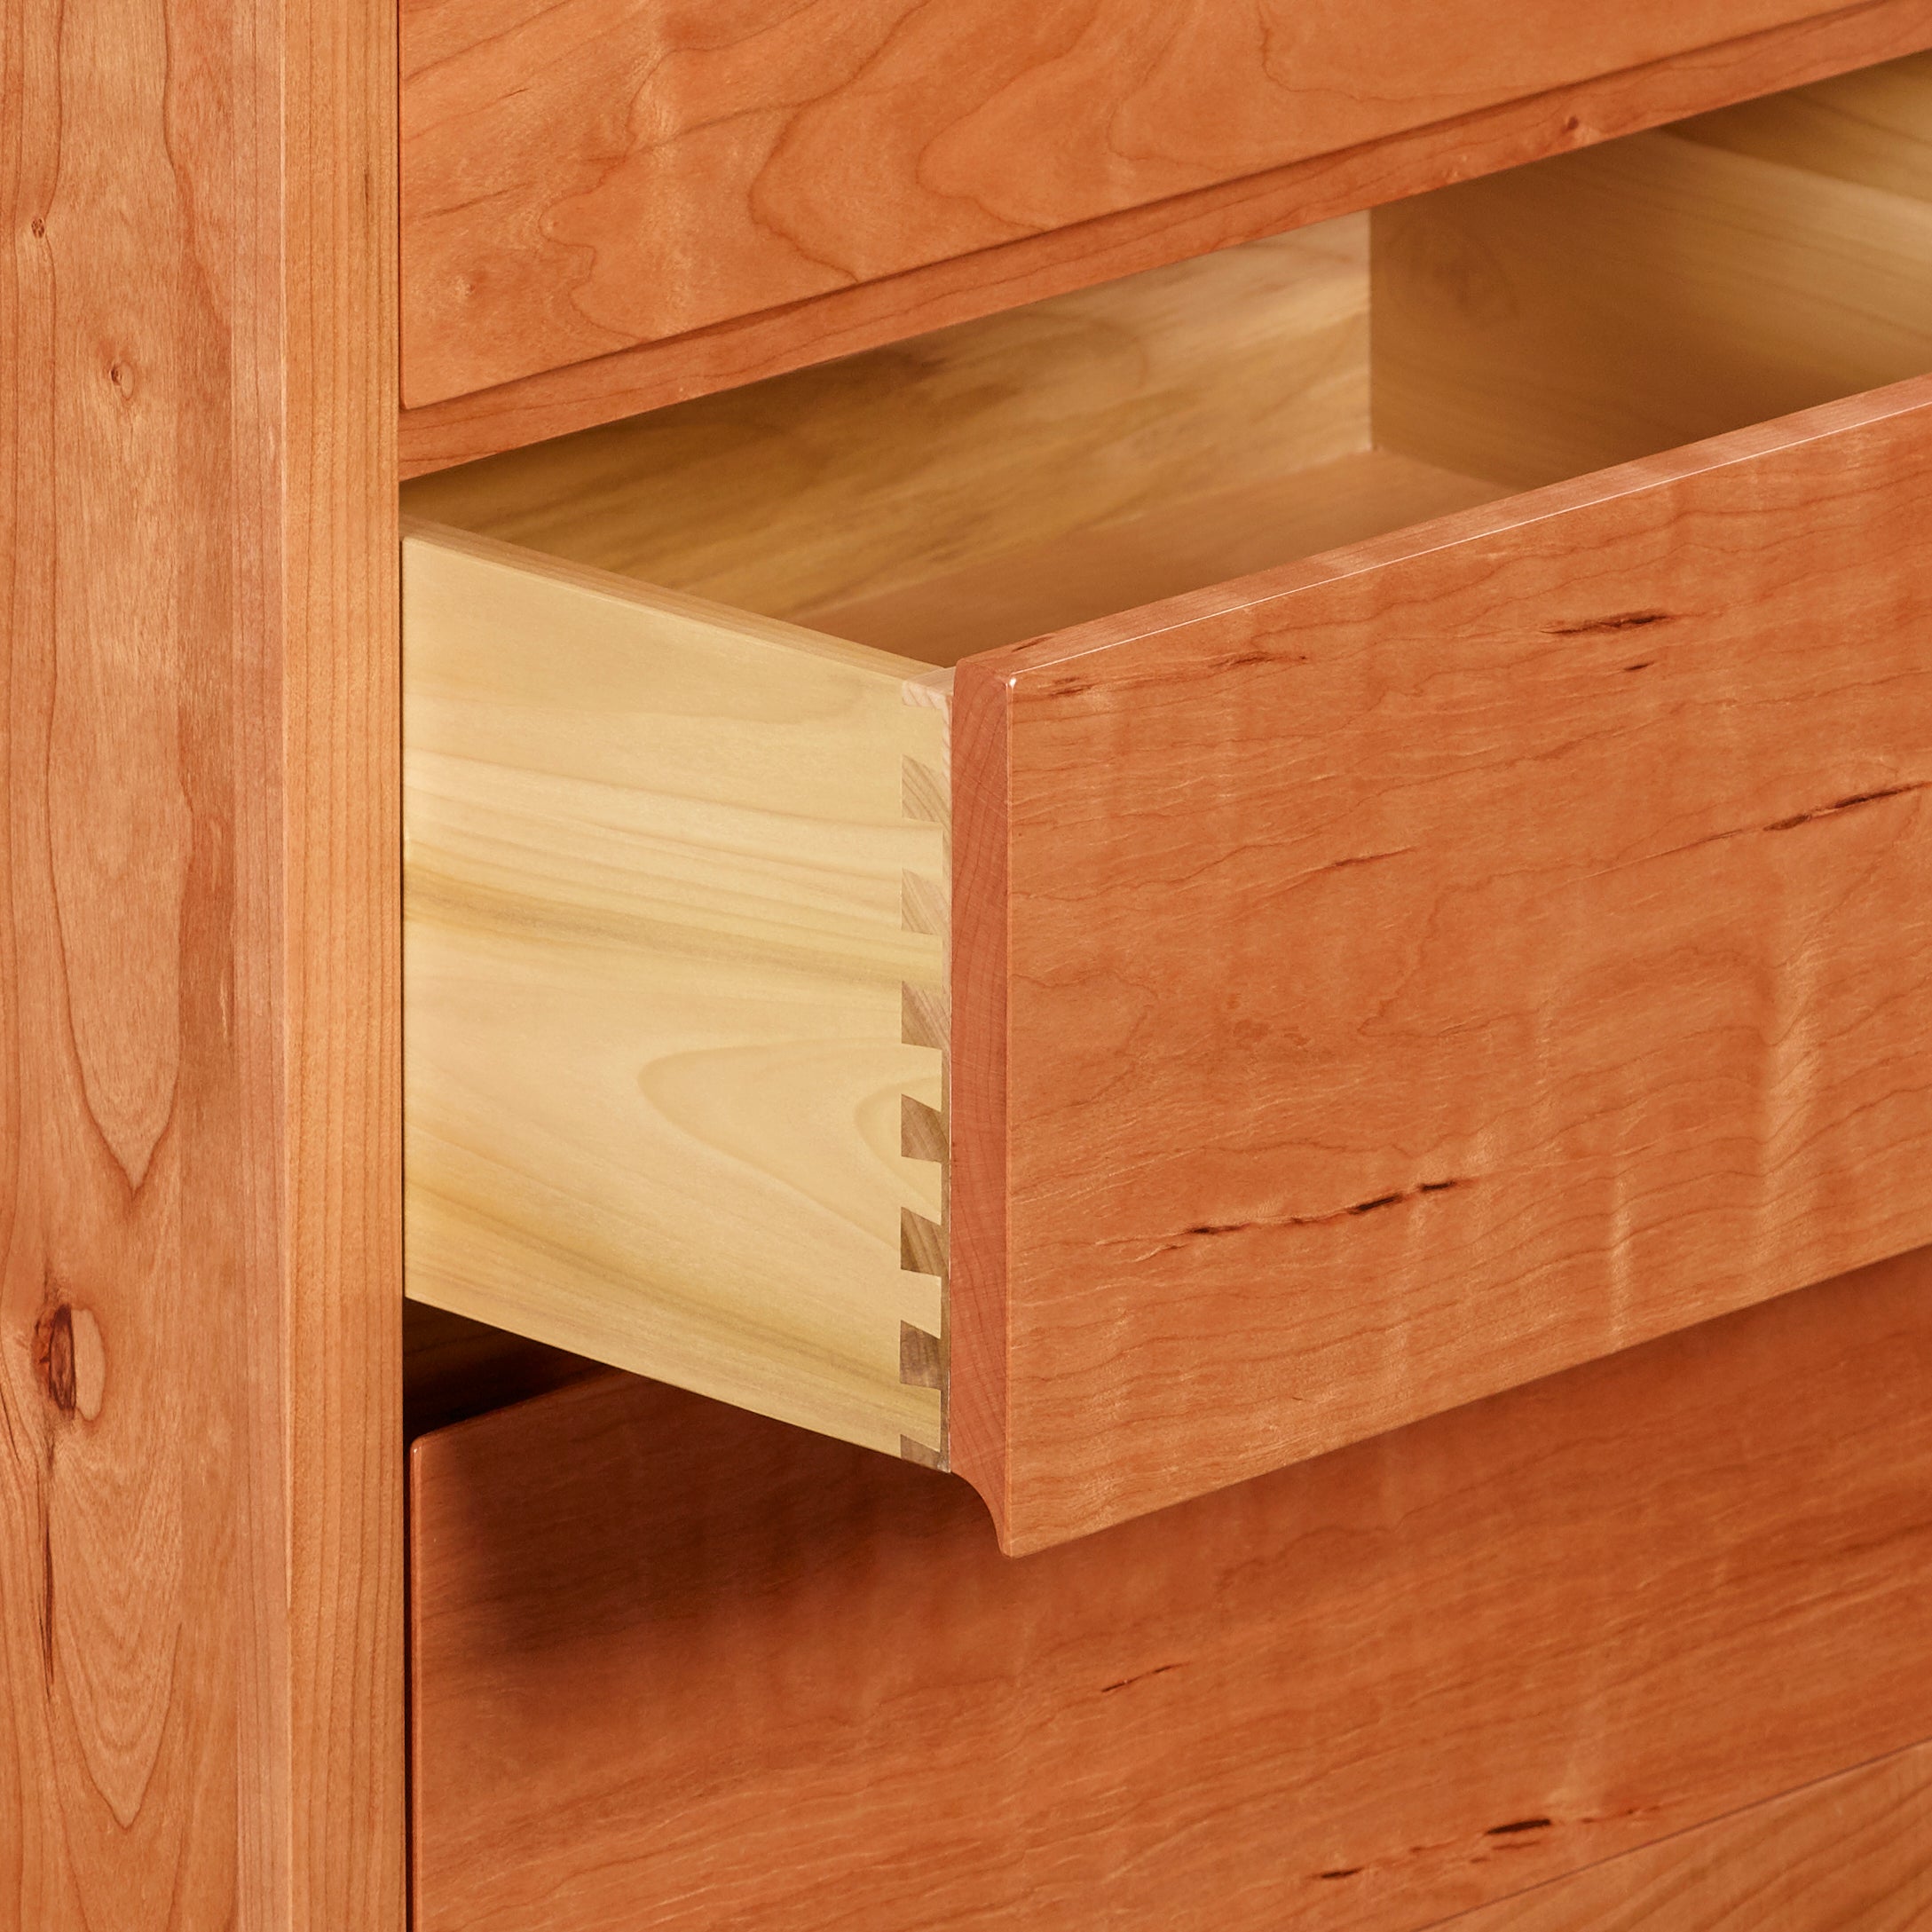 Open drawer of cherry Acadia bedroom storage chest showing dovetail joinery